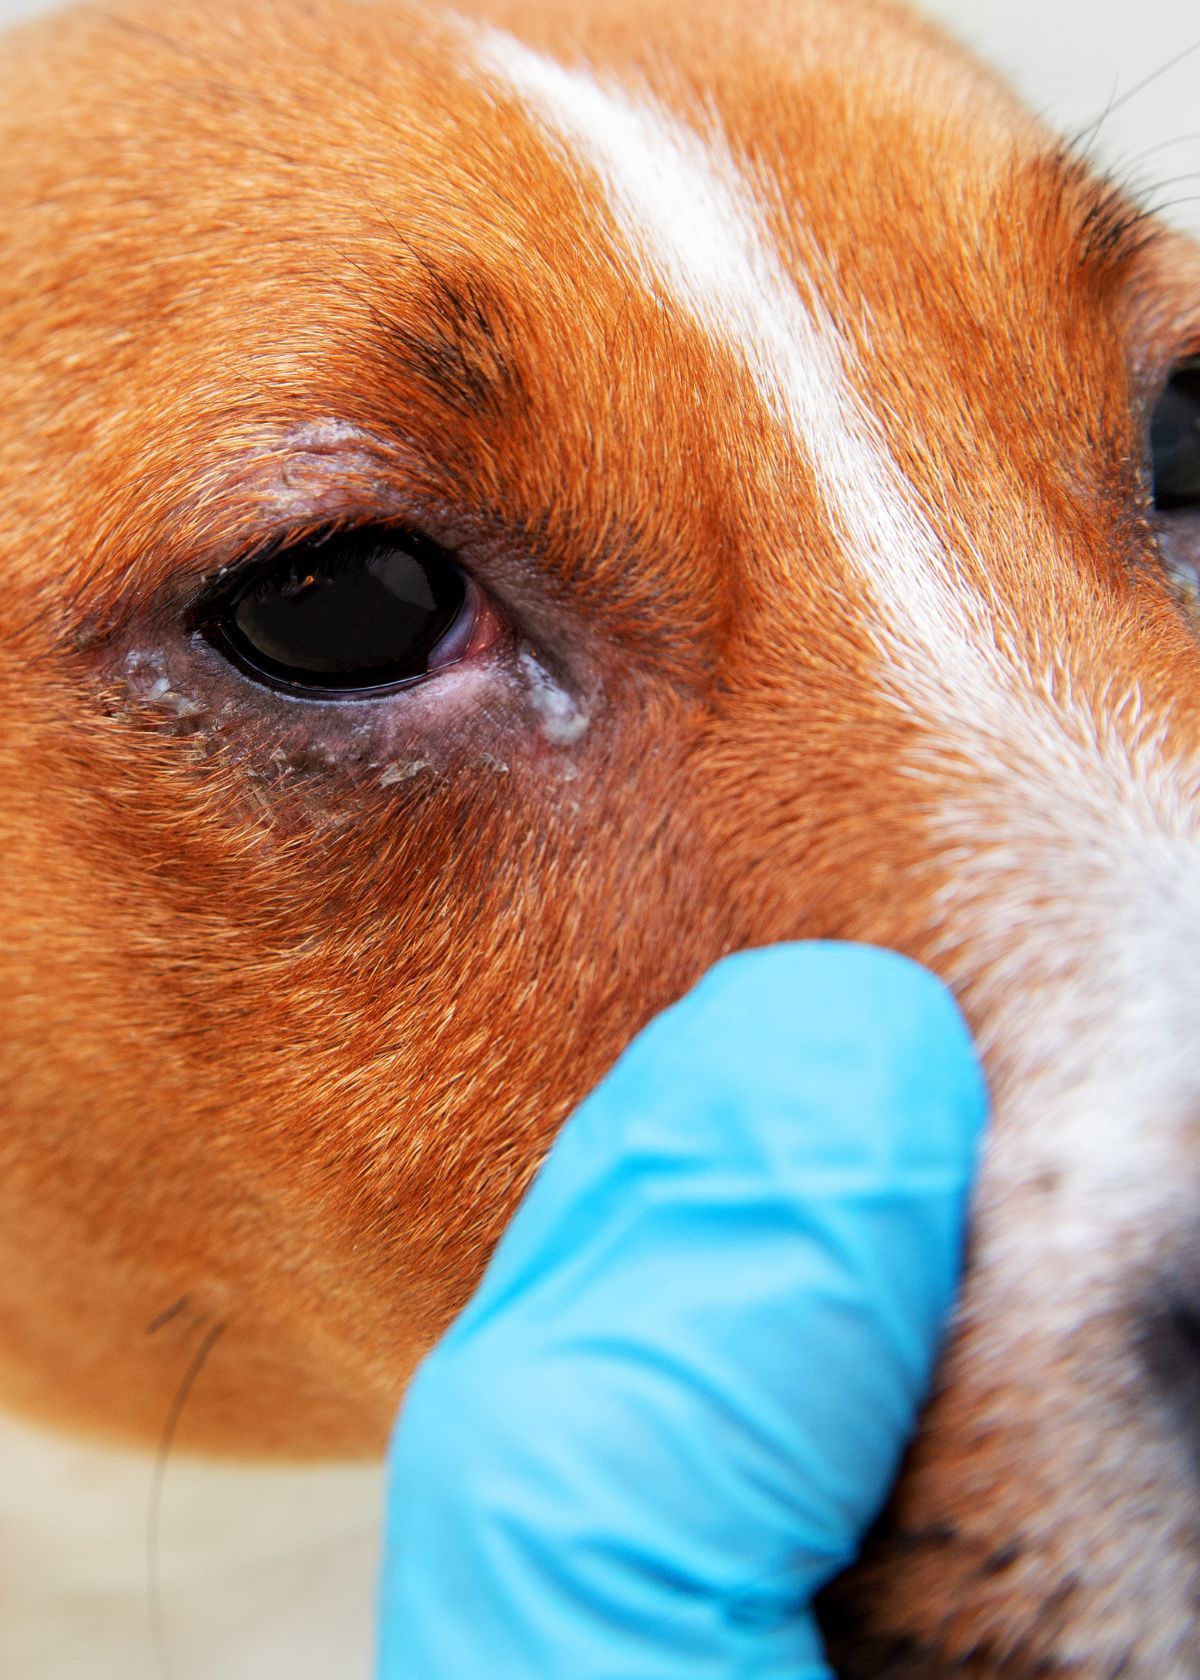 The Best Eye Infection Medicine for Your Dog!